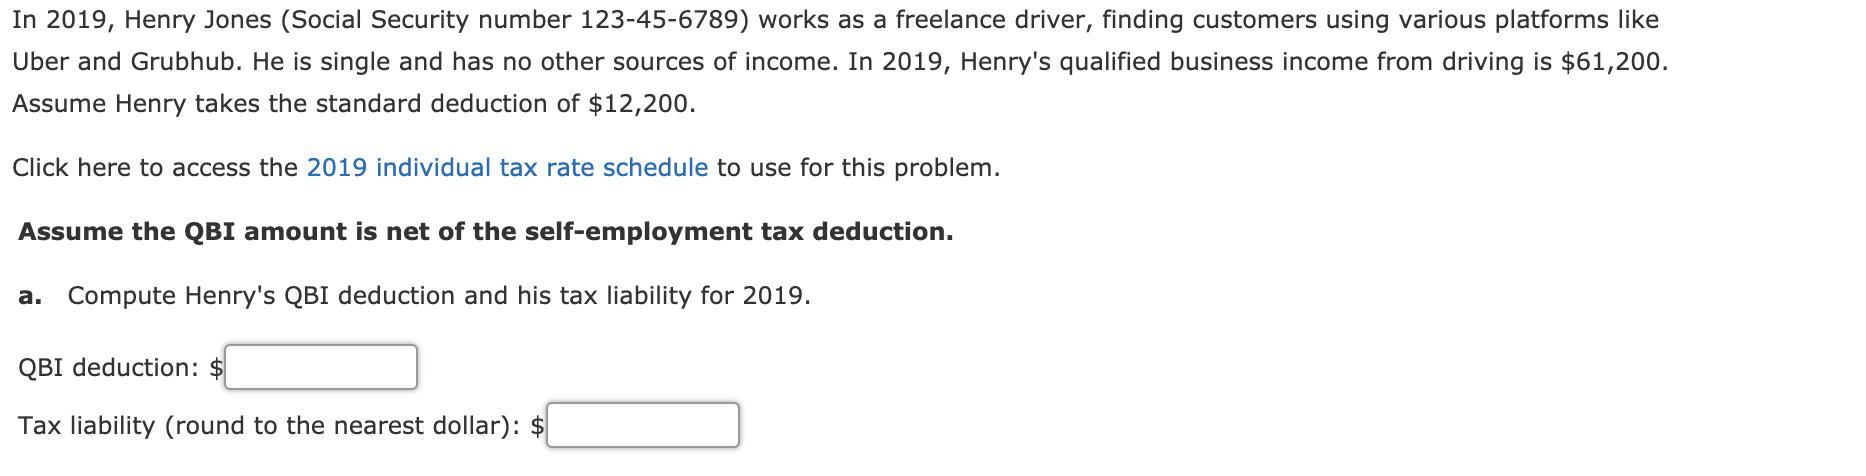 In 2019, Henry Jones (Social Security number 123-45-6789) works as a freelance driver, finding customers using various platfo